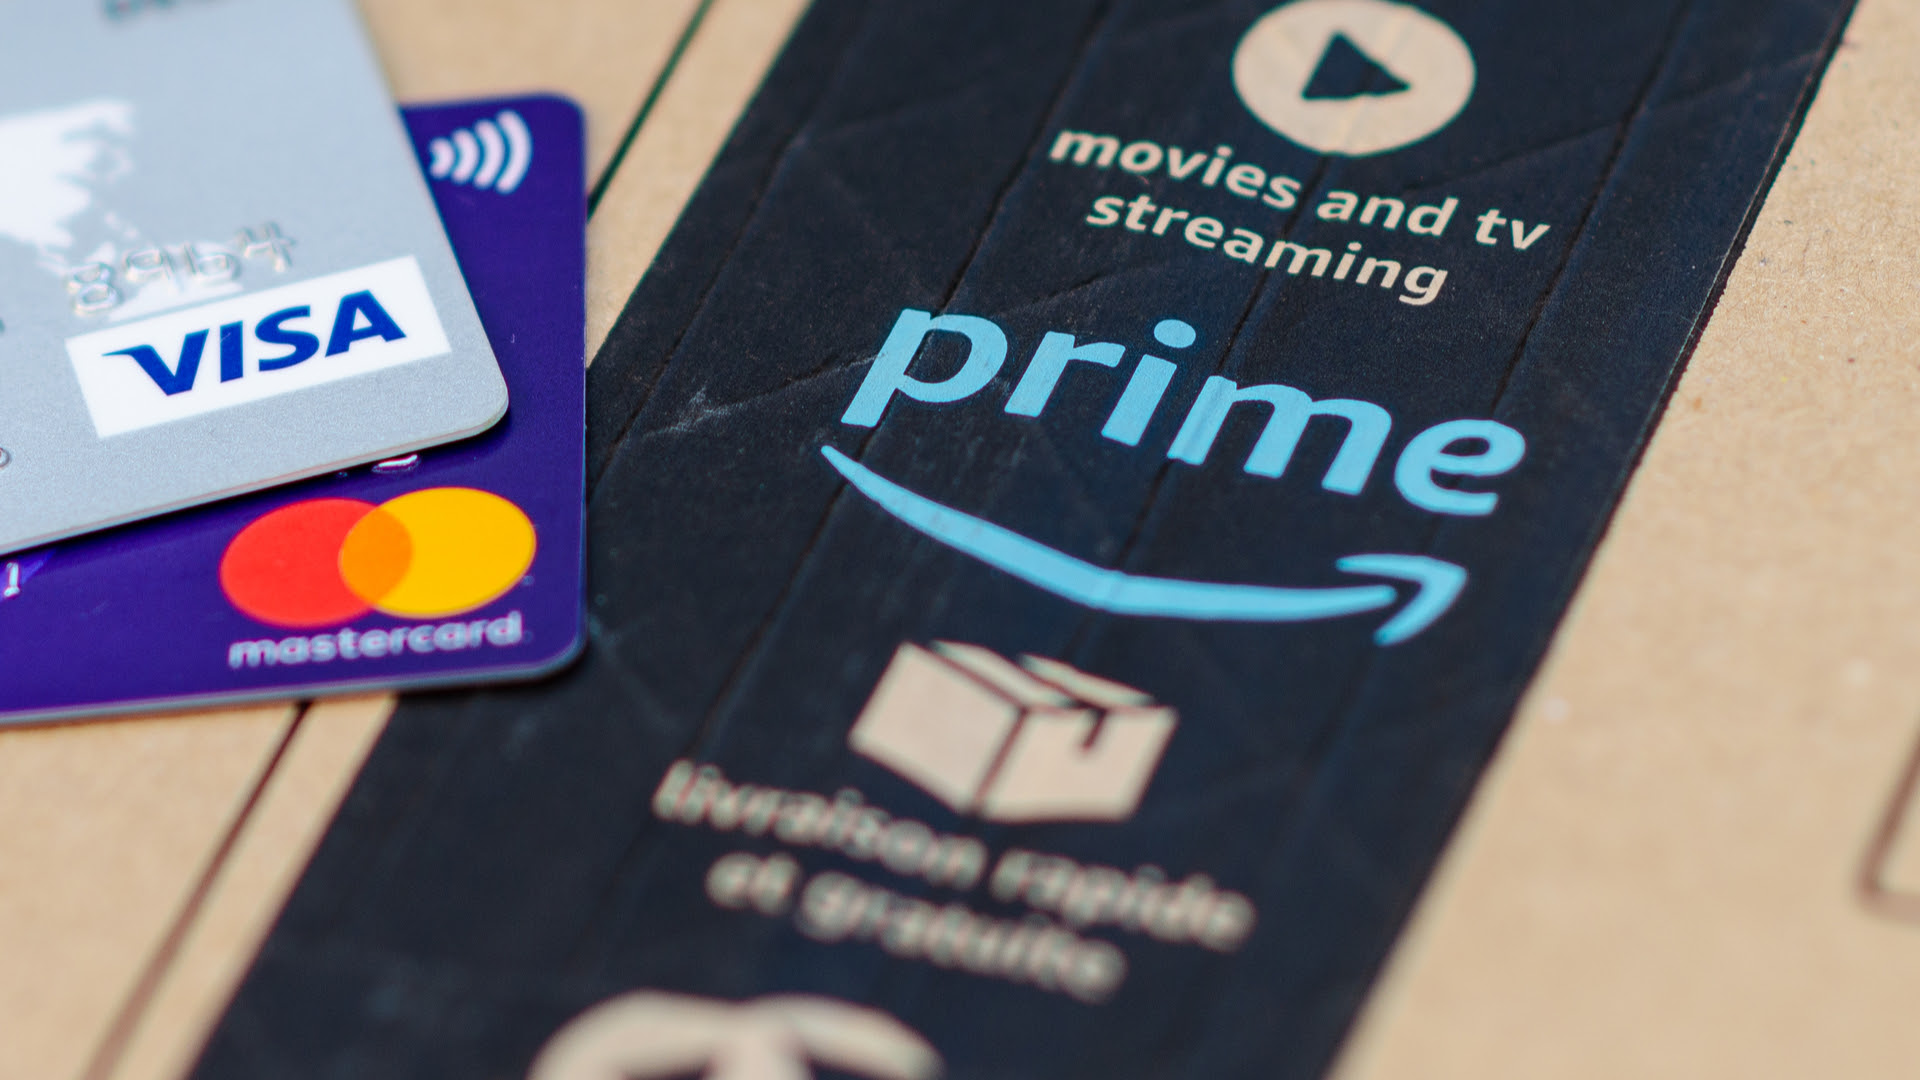 5 Amazon Prime pro tips to stop you wasting your money